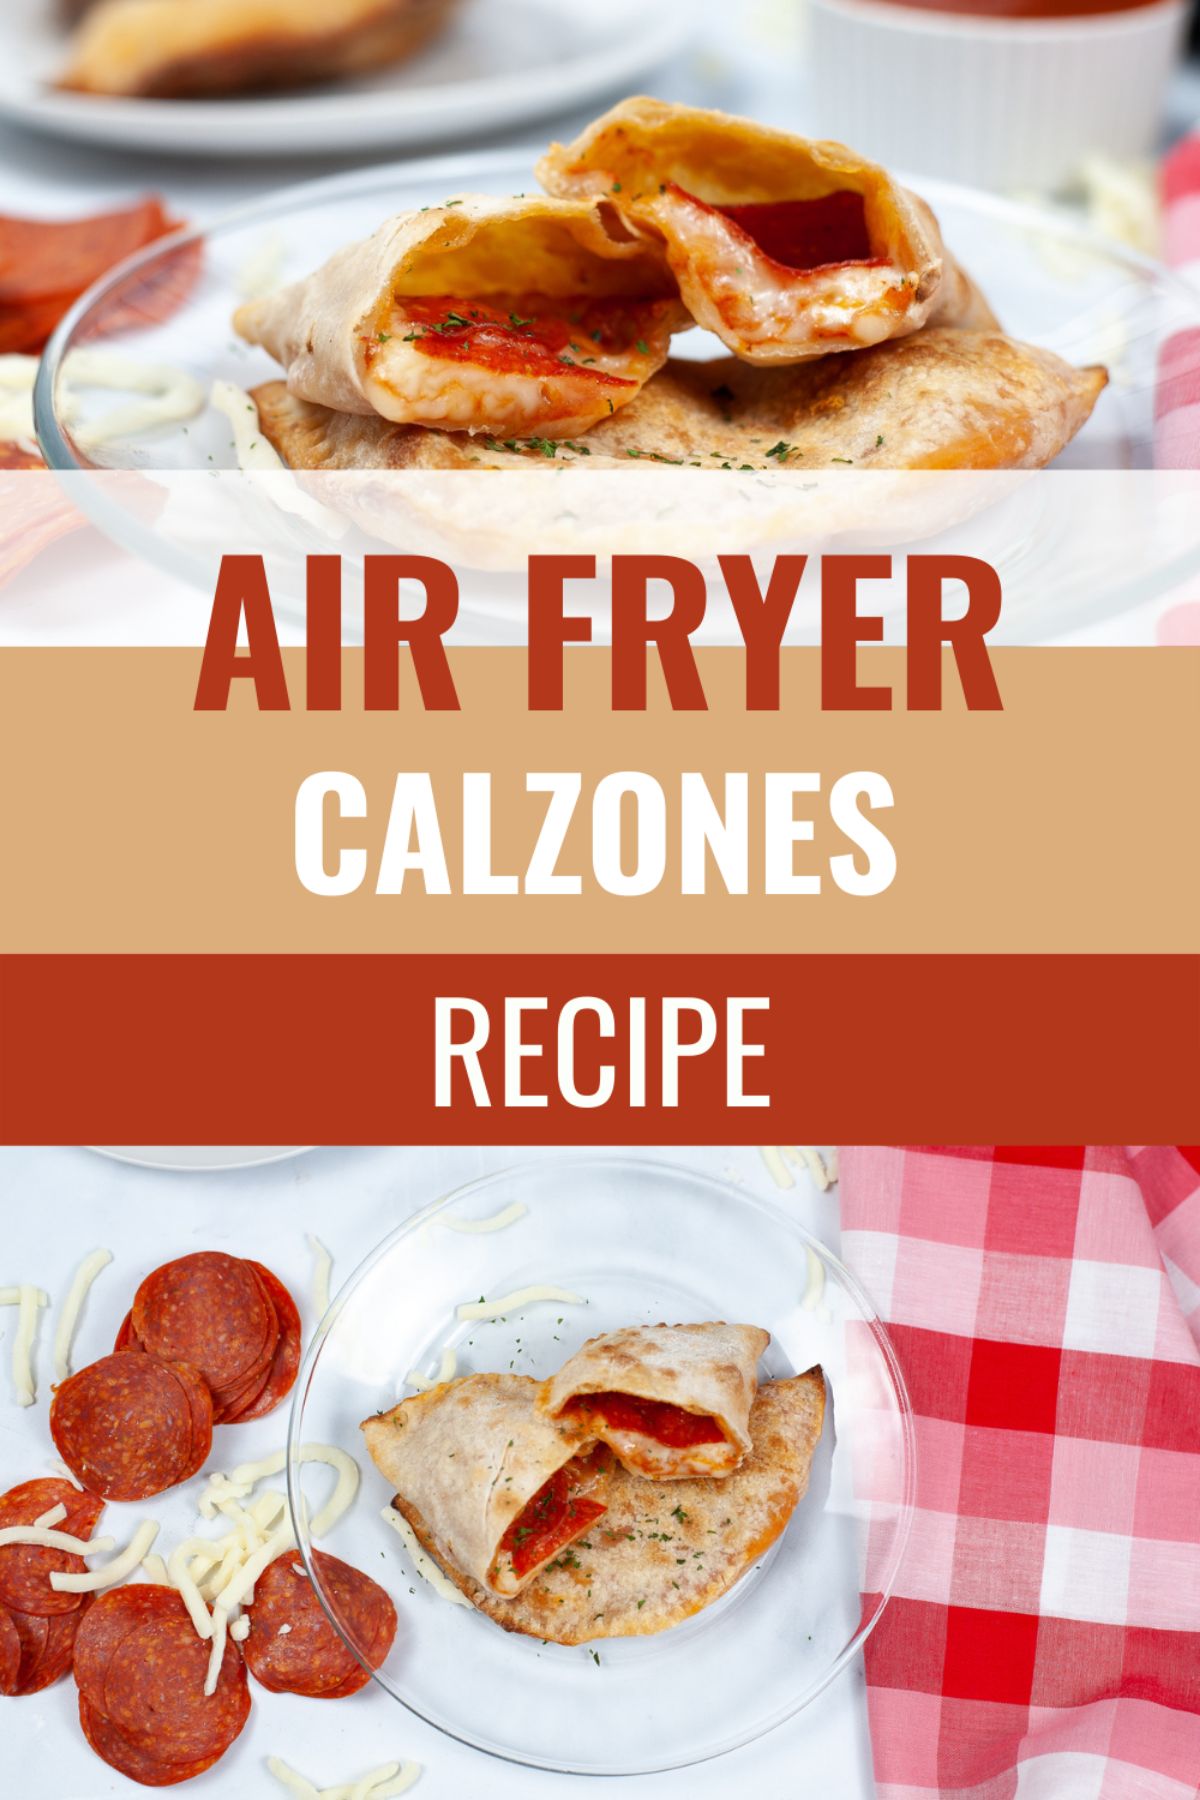 Air Fryer Calzone Recipe is a savory bread pocket that is filled with gooey cheese and your favorite pizza topping. It's easy to make! #airfryer #calzone #calzonerecipe #recipe via @wondermomwannab